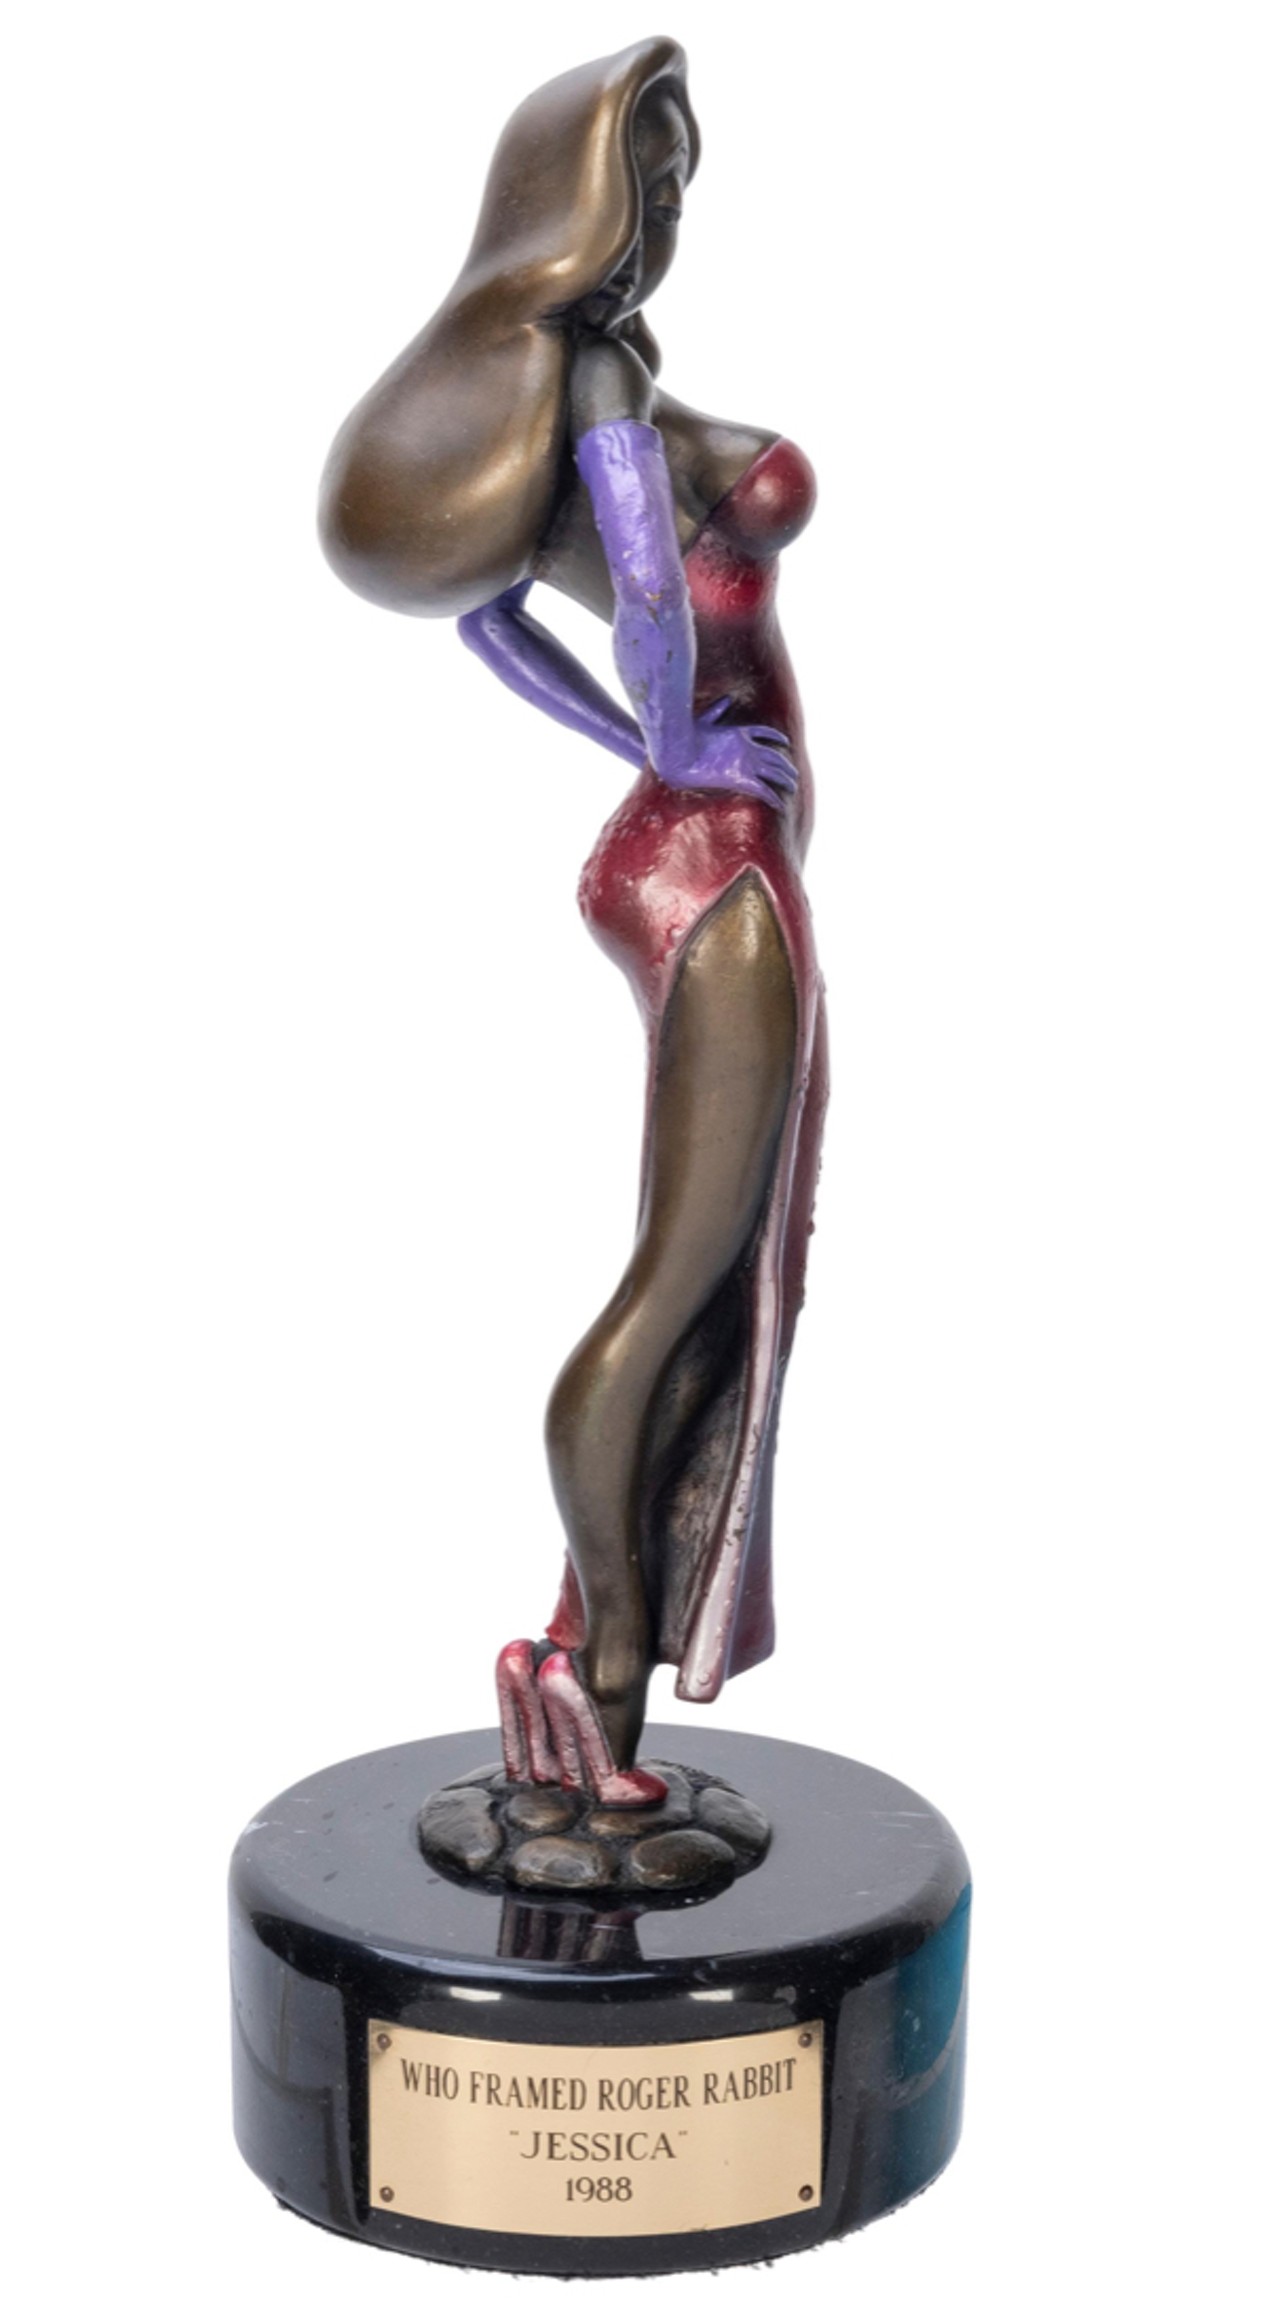 Jessica Rabbit bronze statue by Henry Alvarez
Estimated Sale Price: $1500-2500 
Produced in Los Angeles by Wolf&#146;s Head Productions, this piece measures 14&#148; tall and has a marble base with a plaque.